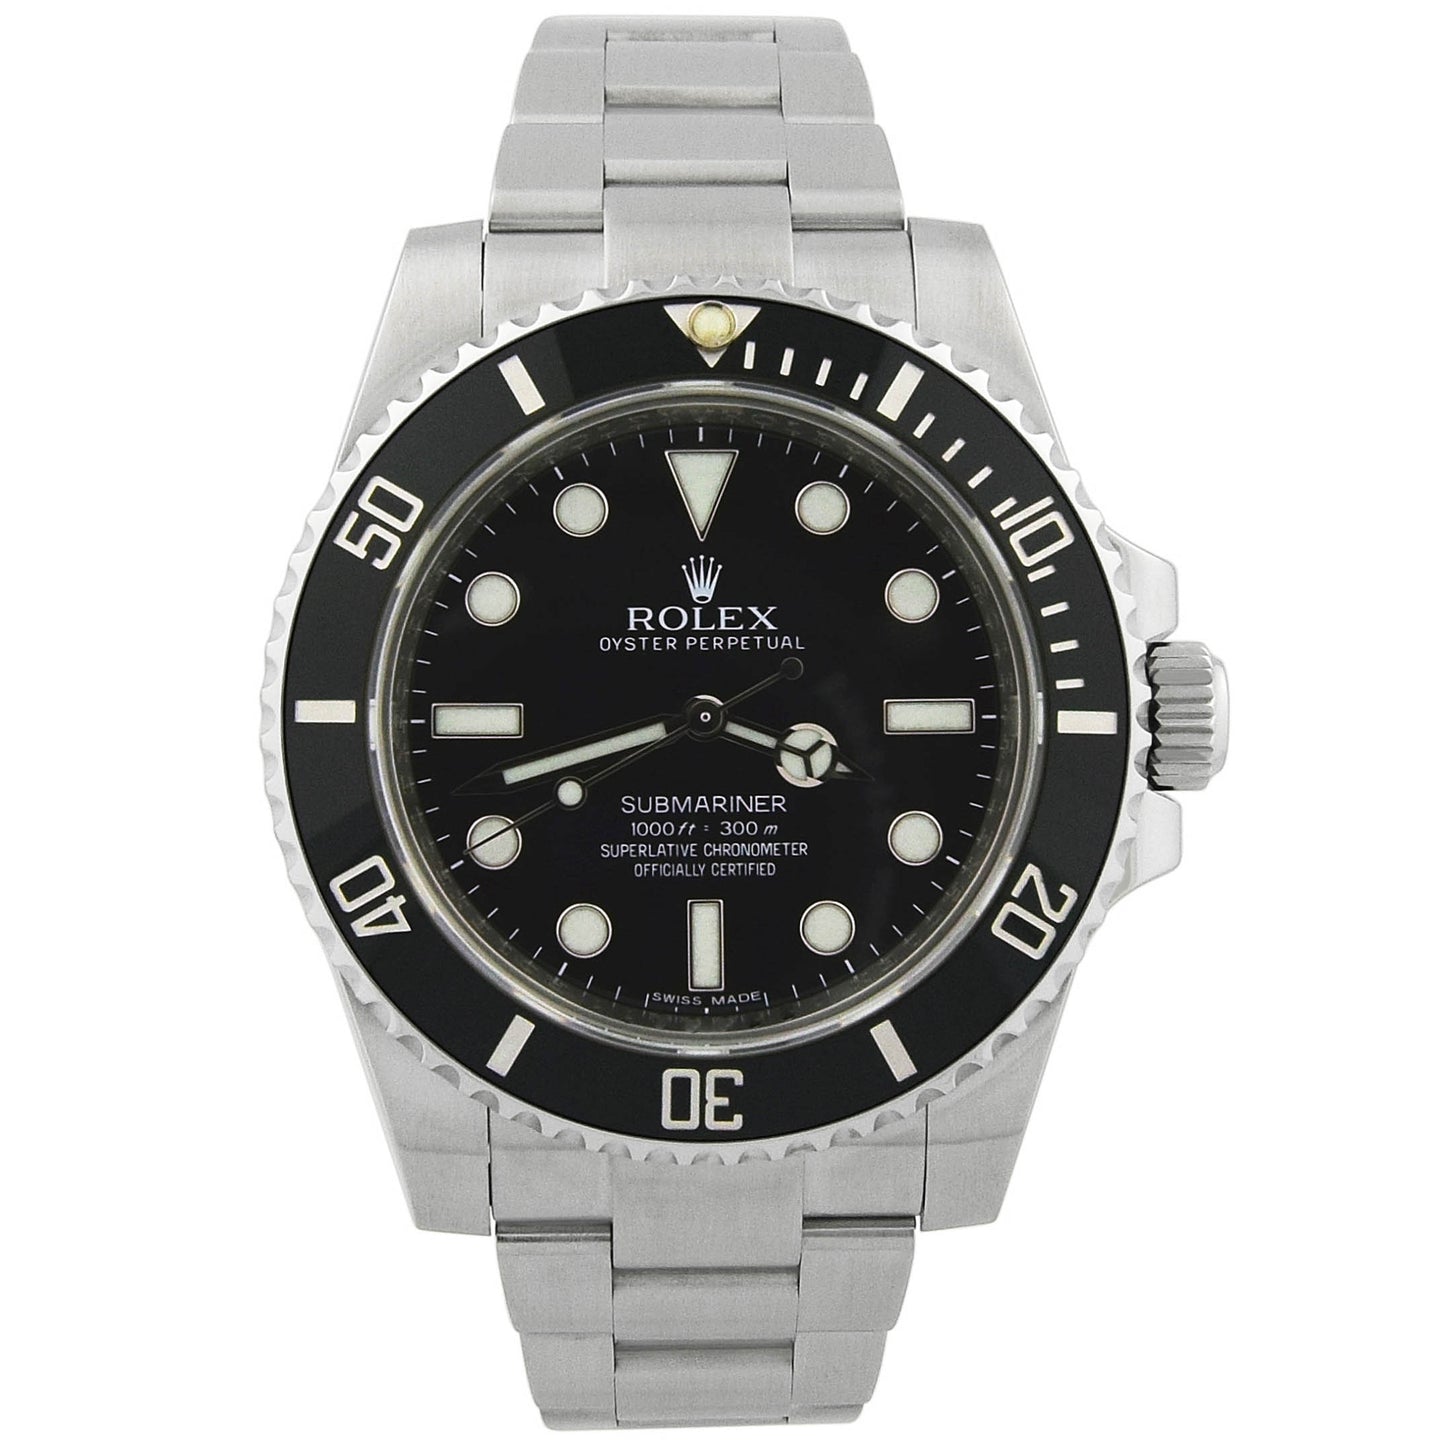 Rolex Men's Submariner No Date Stainless Steel 40mm Black Dot Dial Watch Reference #: 114060 - Happy Jewelers Fine Jewelry Lifetime Warranty